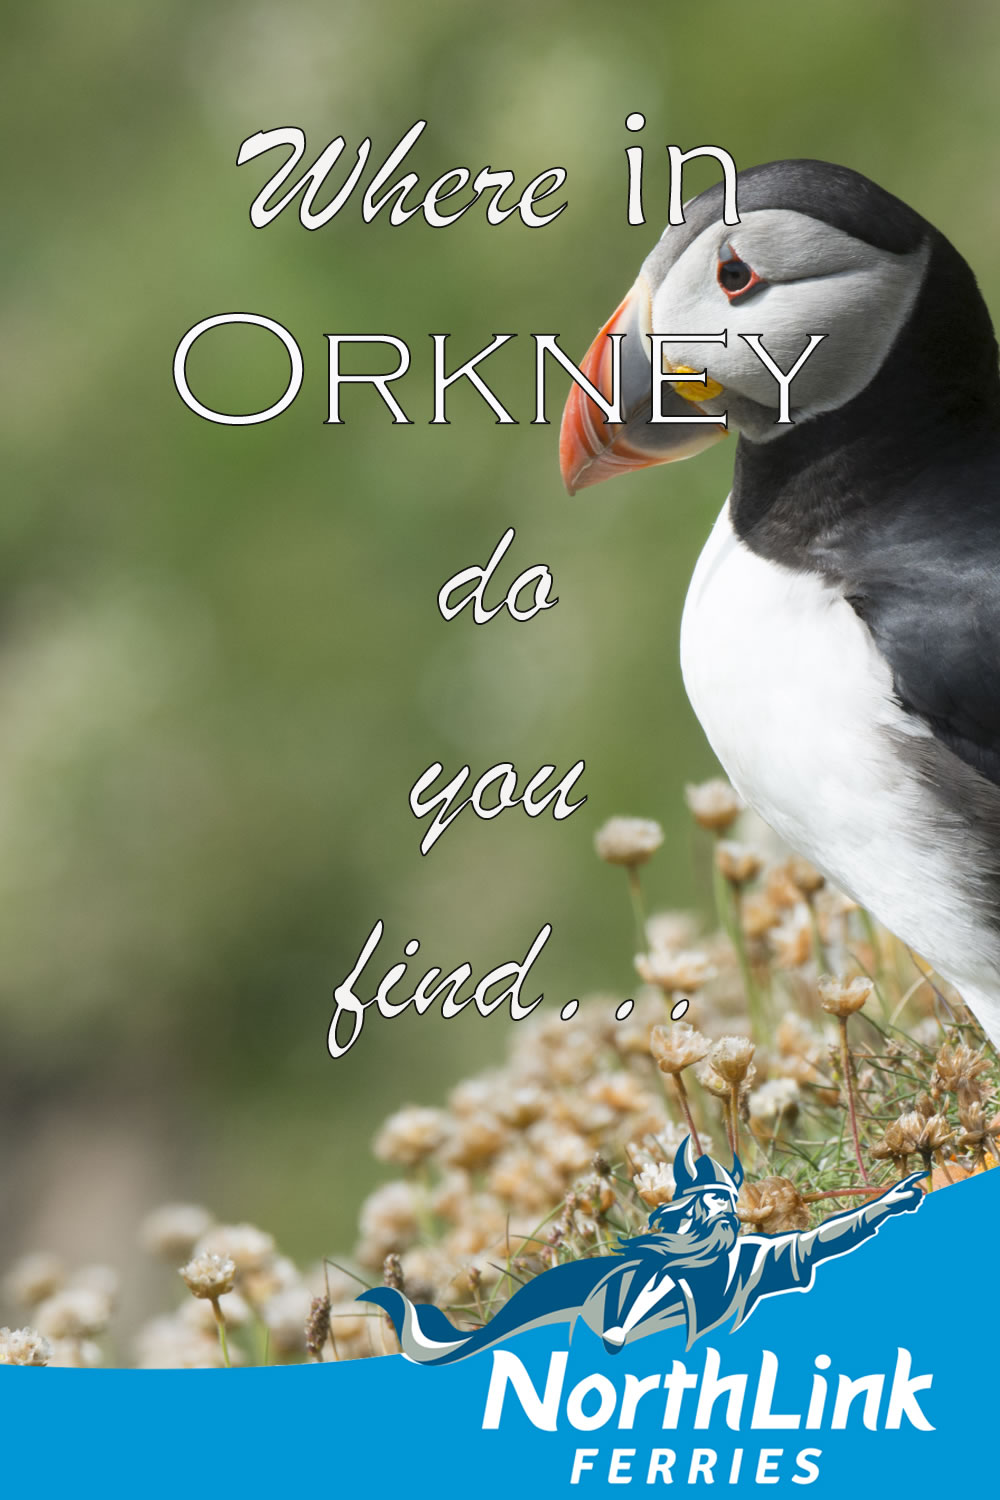 Where in Orkney do you find...